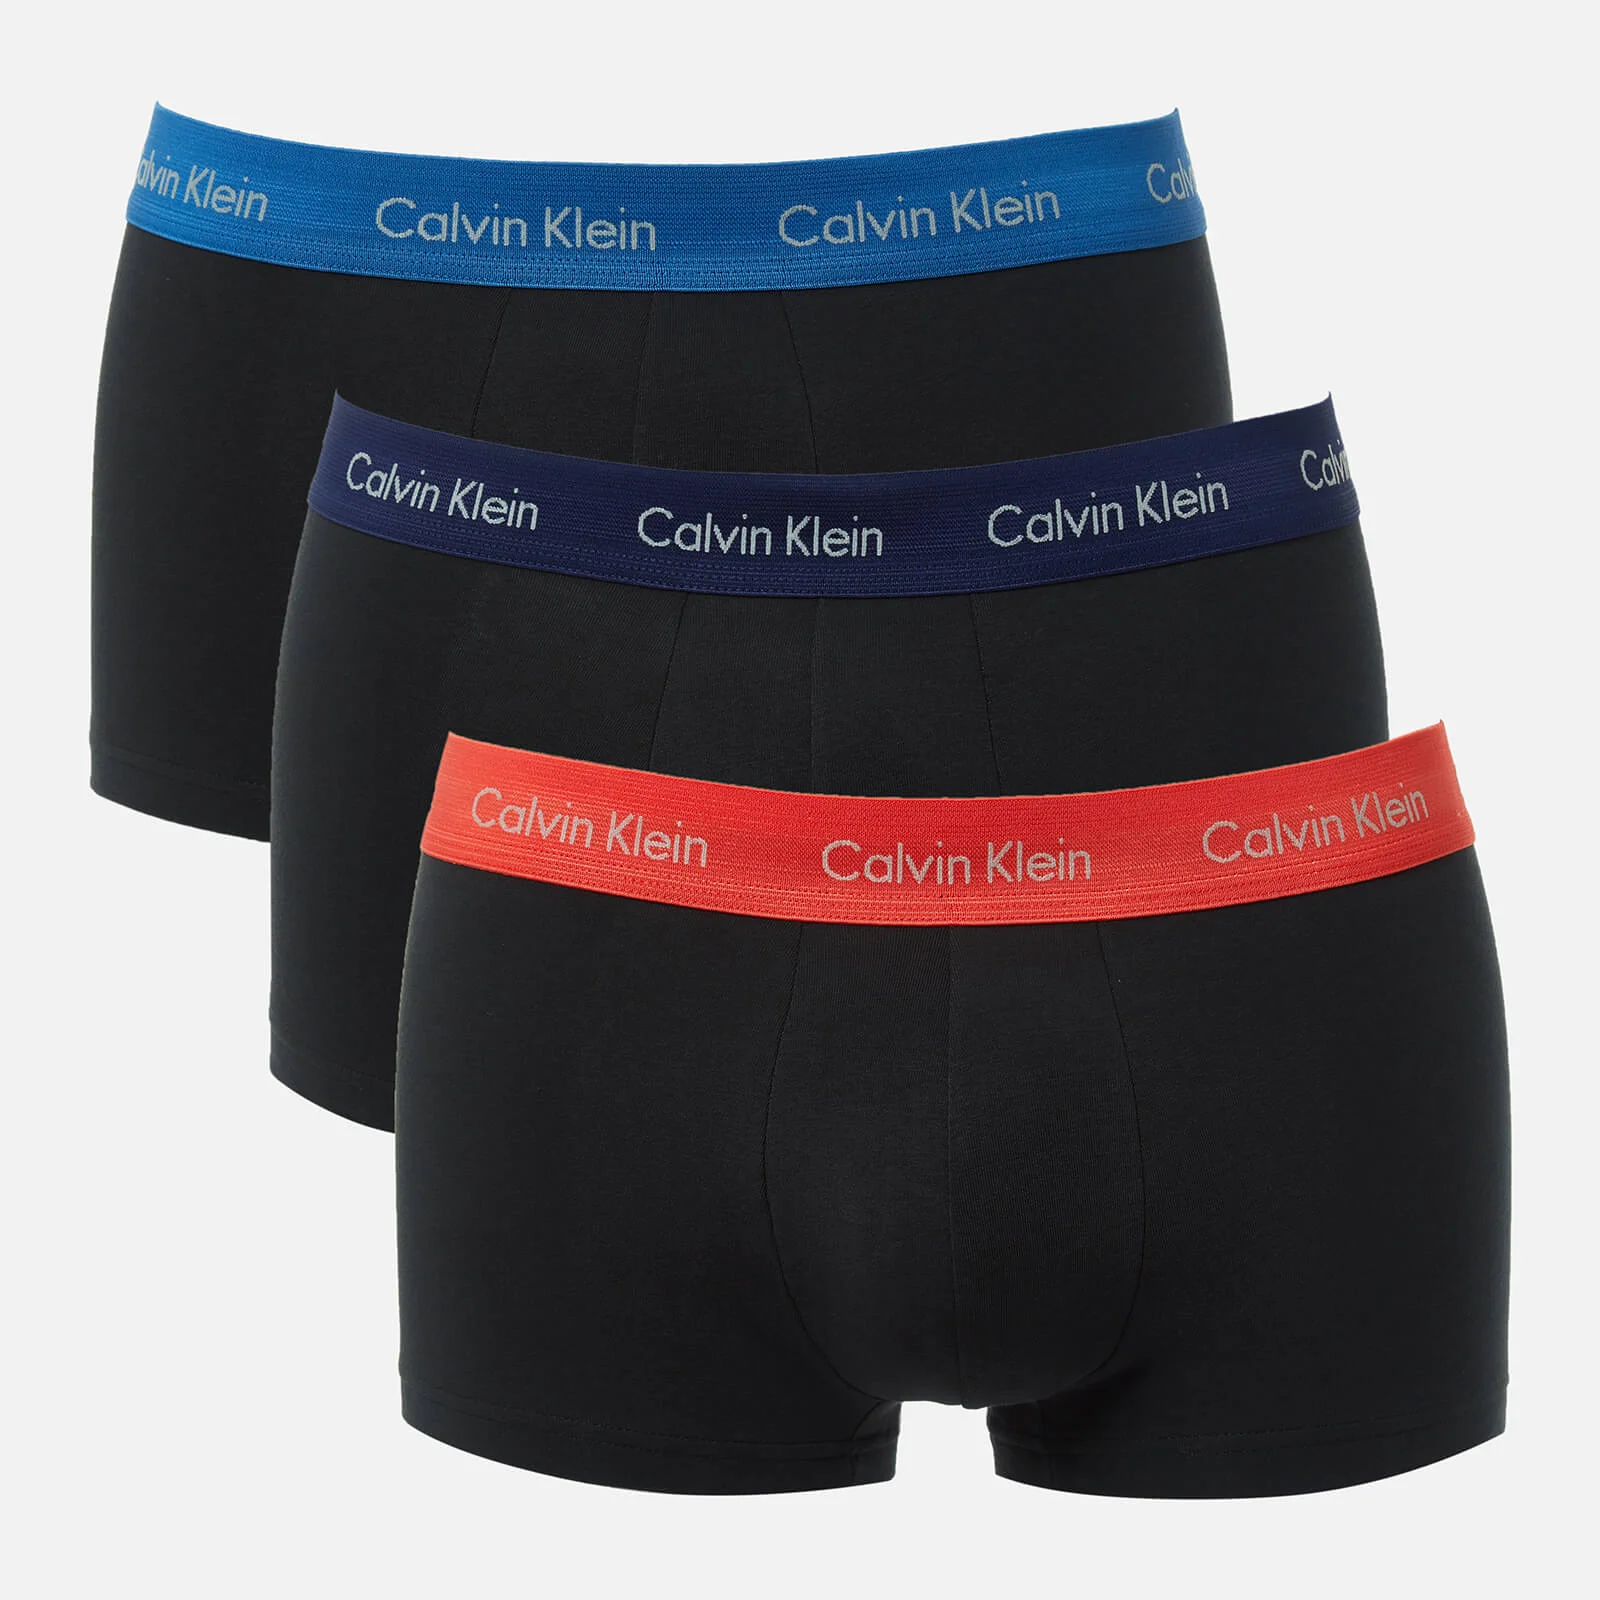 Calvin Klein Men's 3 Pack Low Rise Trunks - Minnow/Horoscope/Inferno Image 1